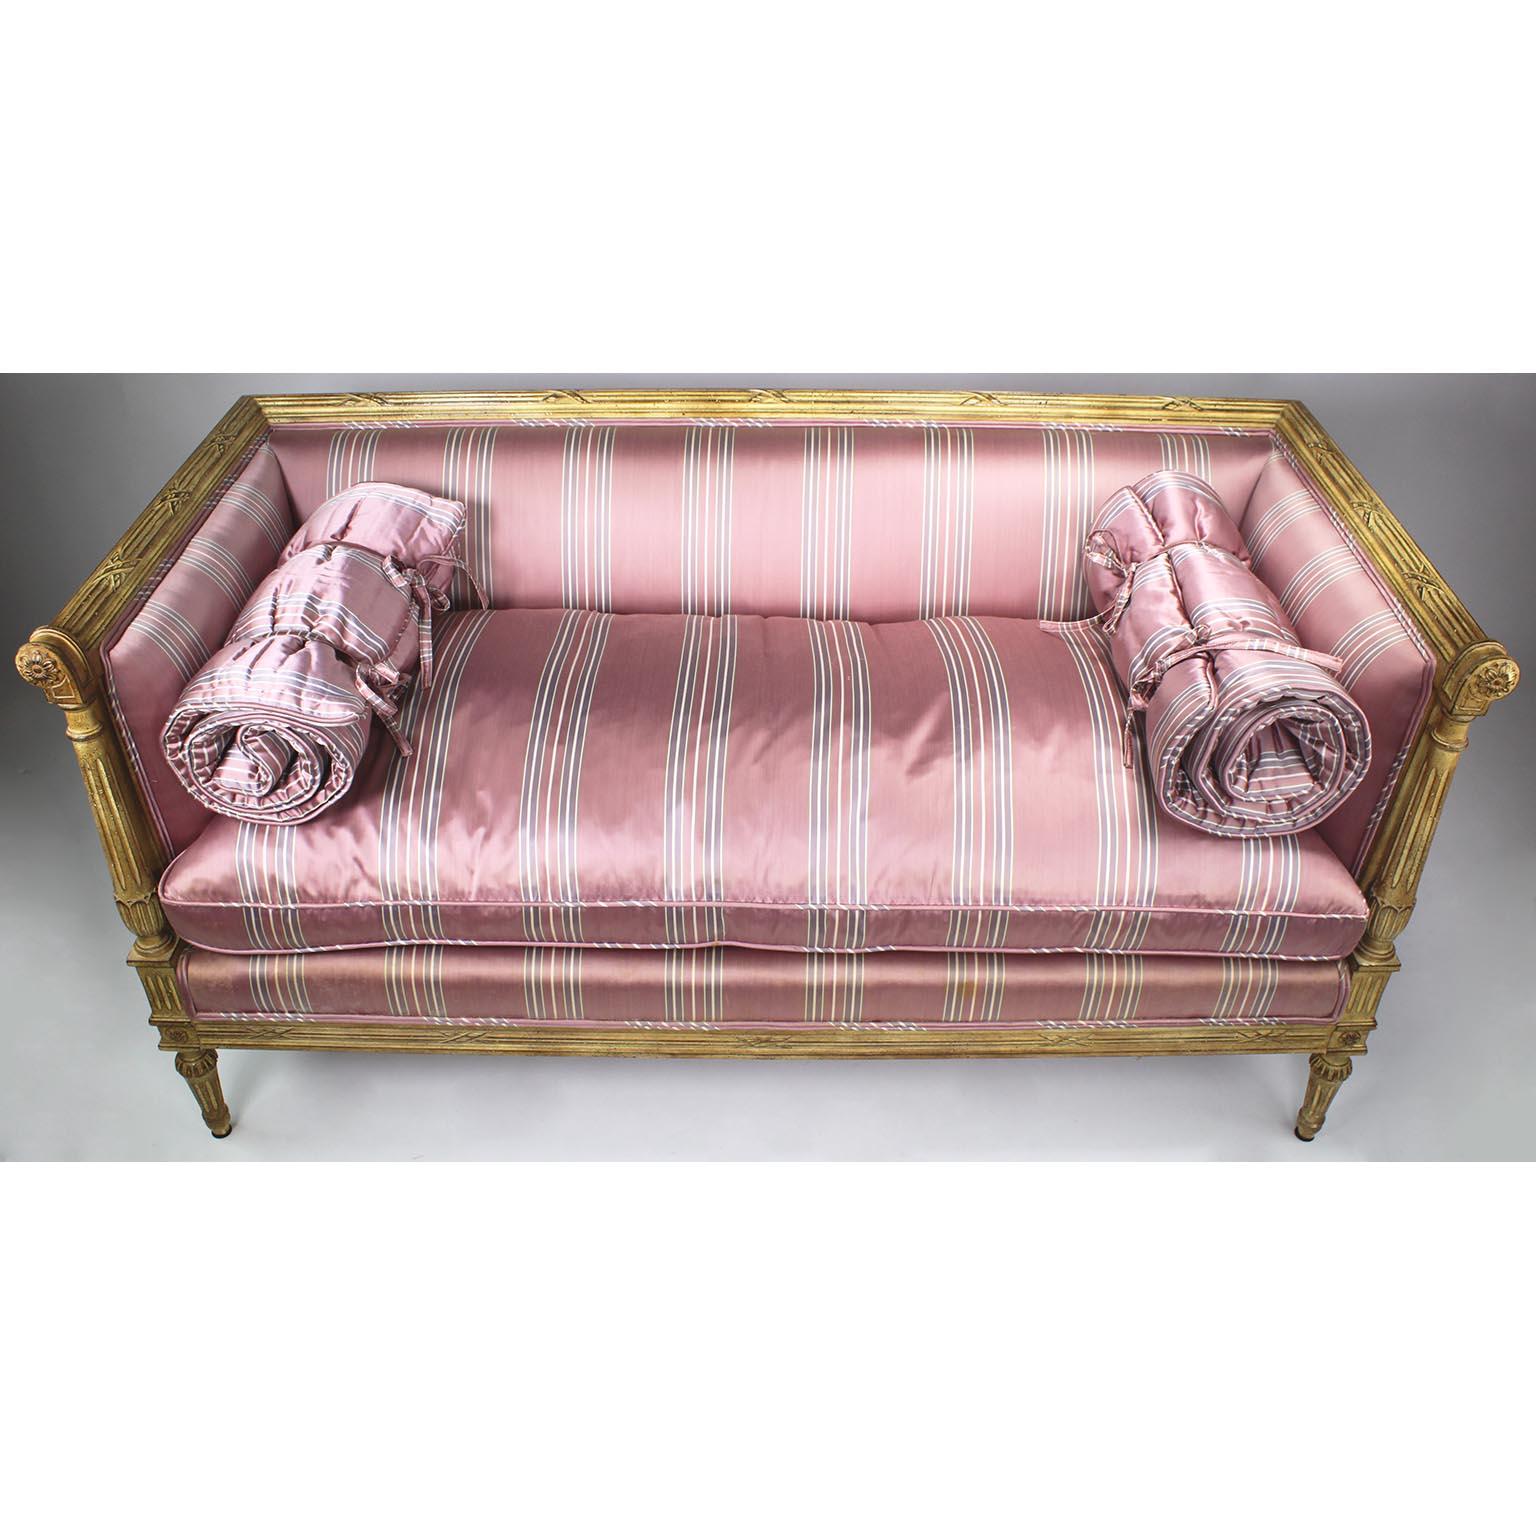 Pair of French Louis XVI Style Carved-Wood Cream-Lacquered Settees, Jansen Attr. In Fair Condition For Sale In Los Angeles, CA